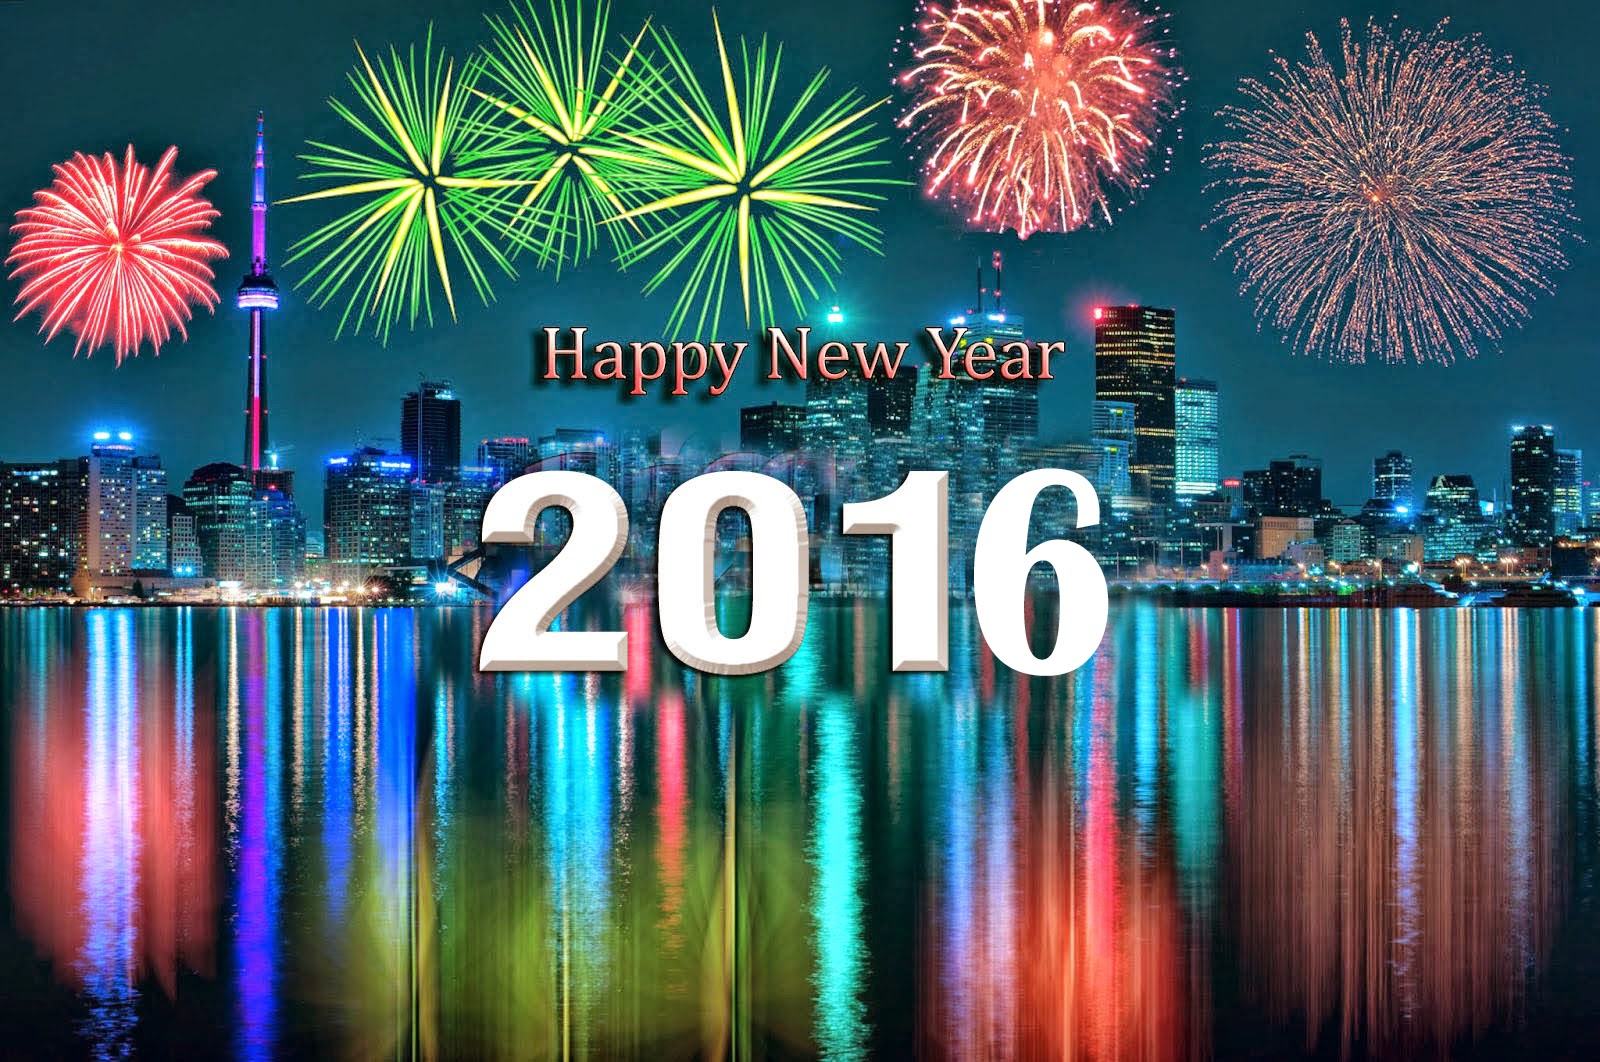 Happy new year 2016 3d images and wallpapers Best Wallpaper 1600x1062